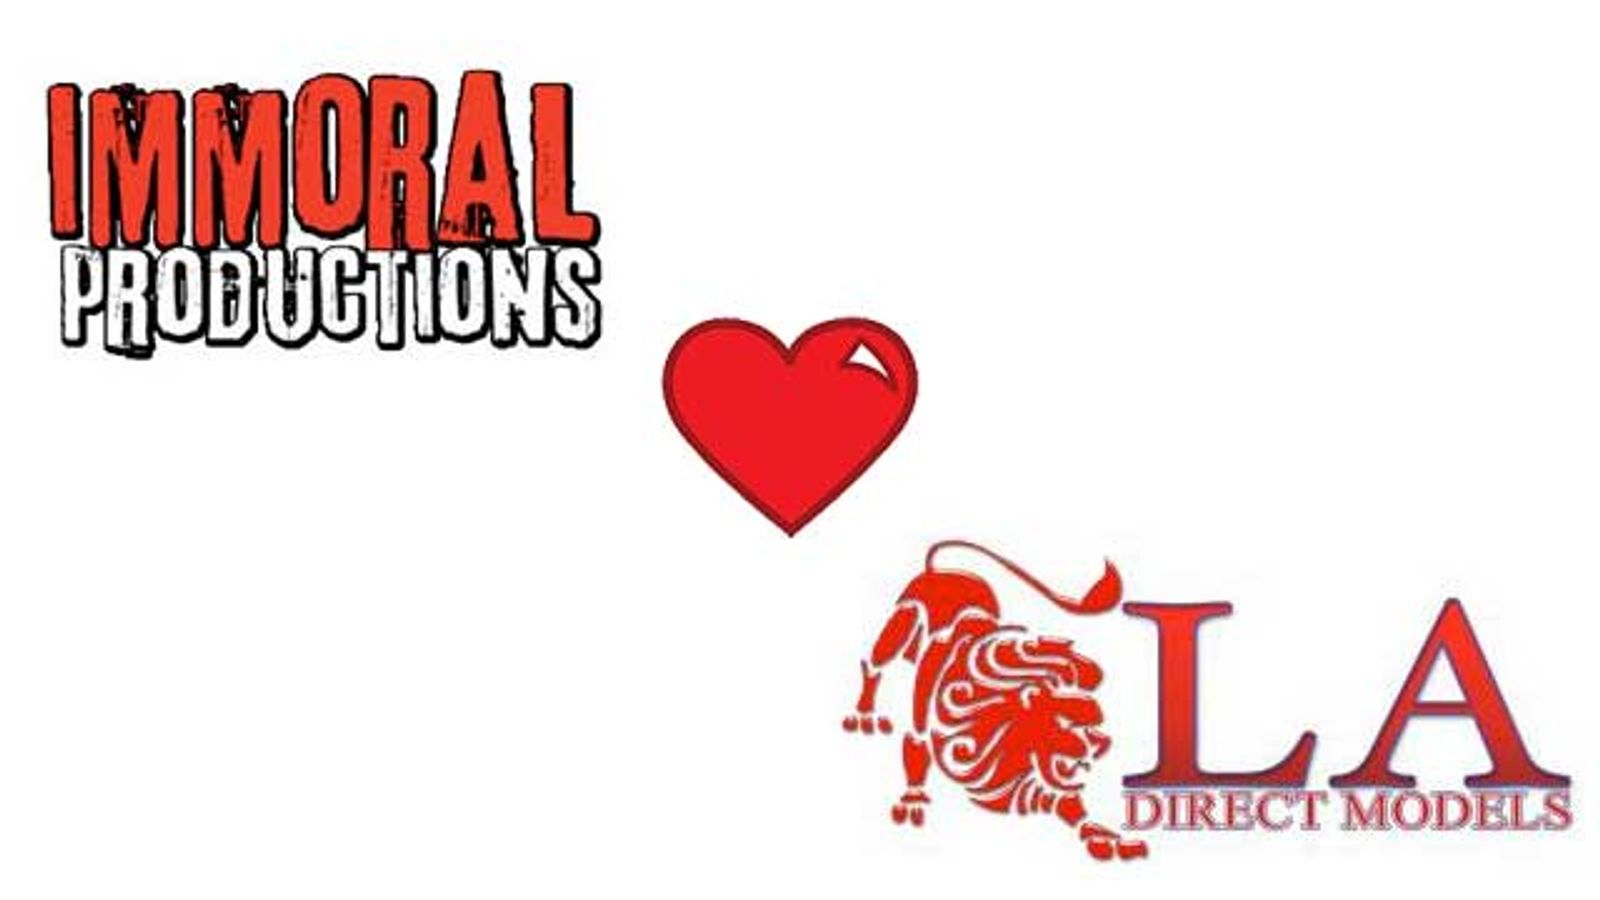 Immoral Productions Booked 200 LA Direct Models in 2012 So Far